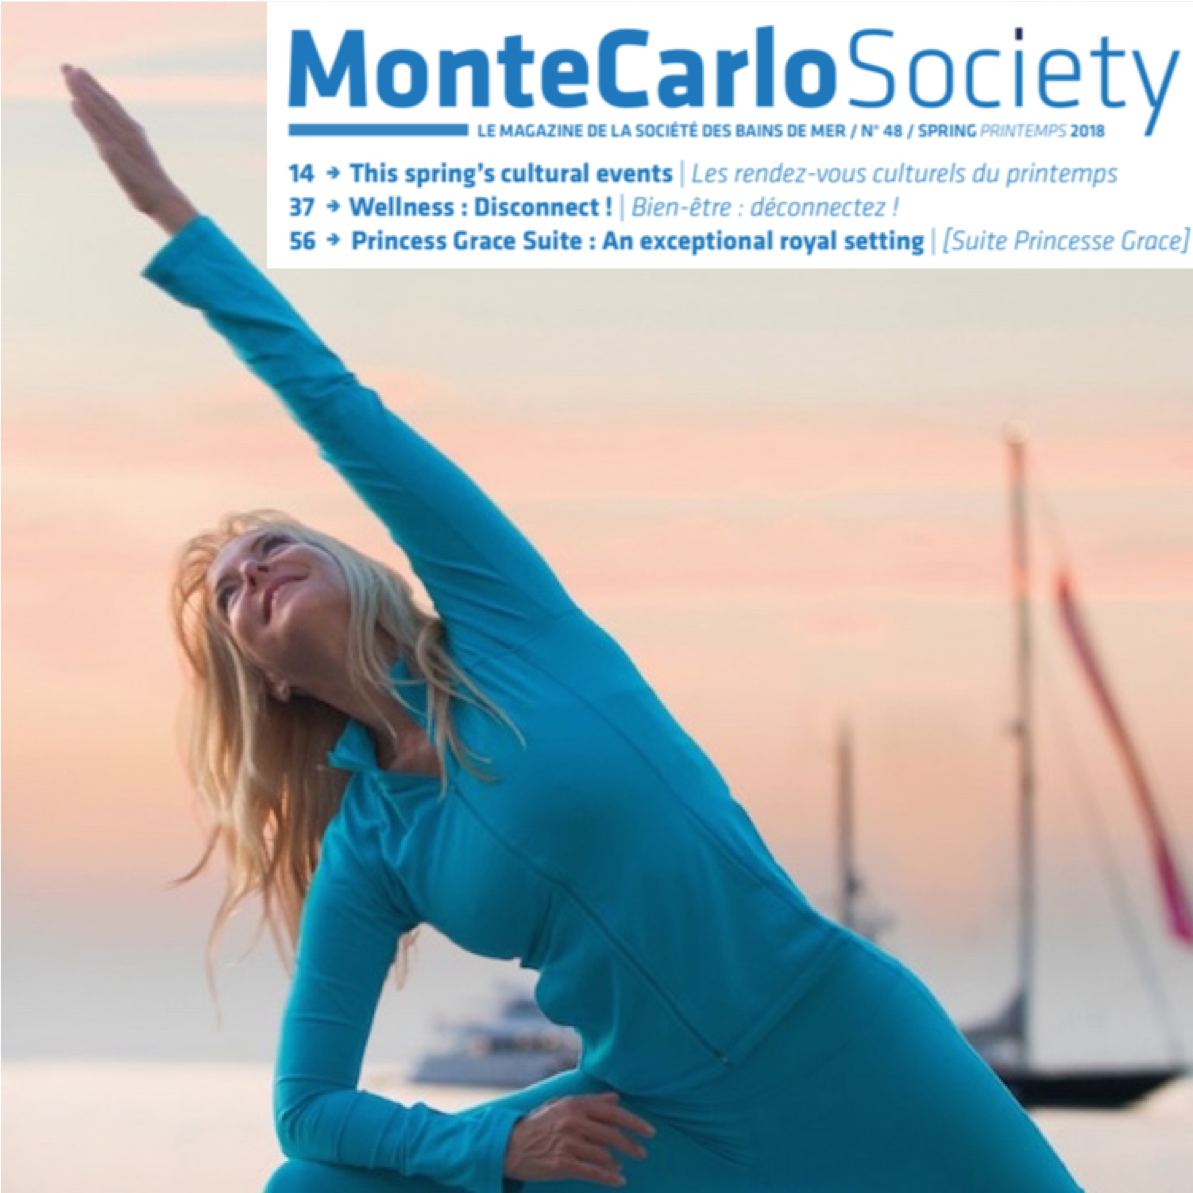 You are currently viewing Sunshine Yoga article in Monte Carlo Society